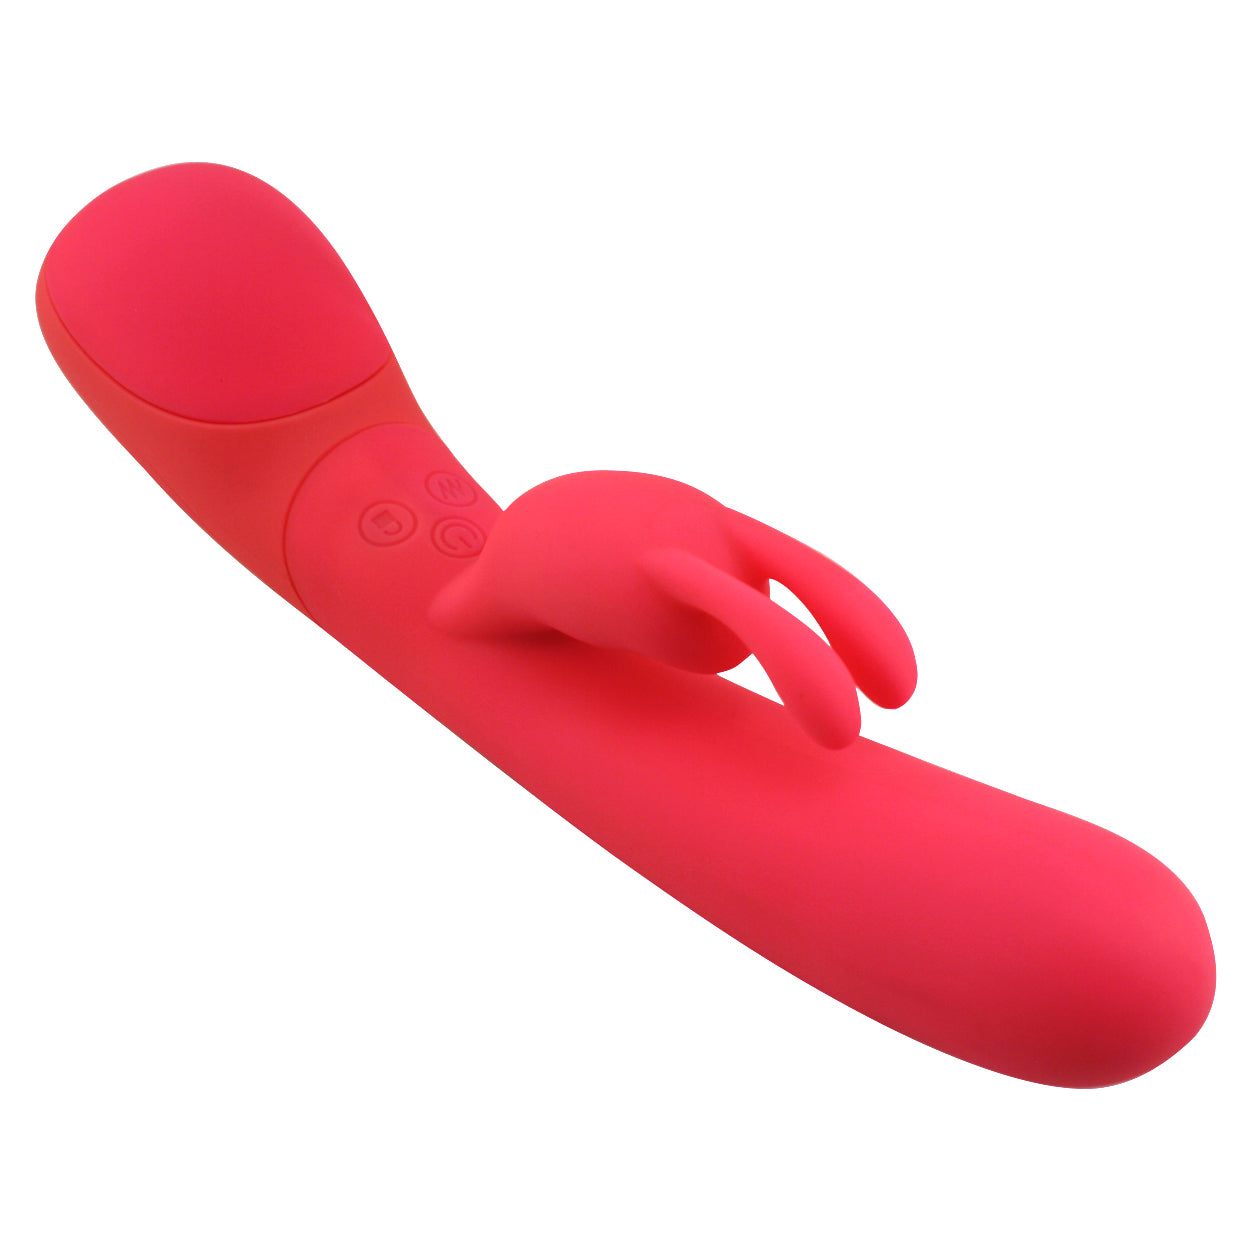 Image of ID 899861058 Squeeze It Bunny Vibrator - Gets Stronger When You Squeeze It